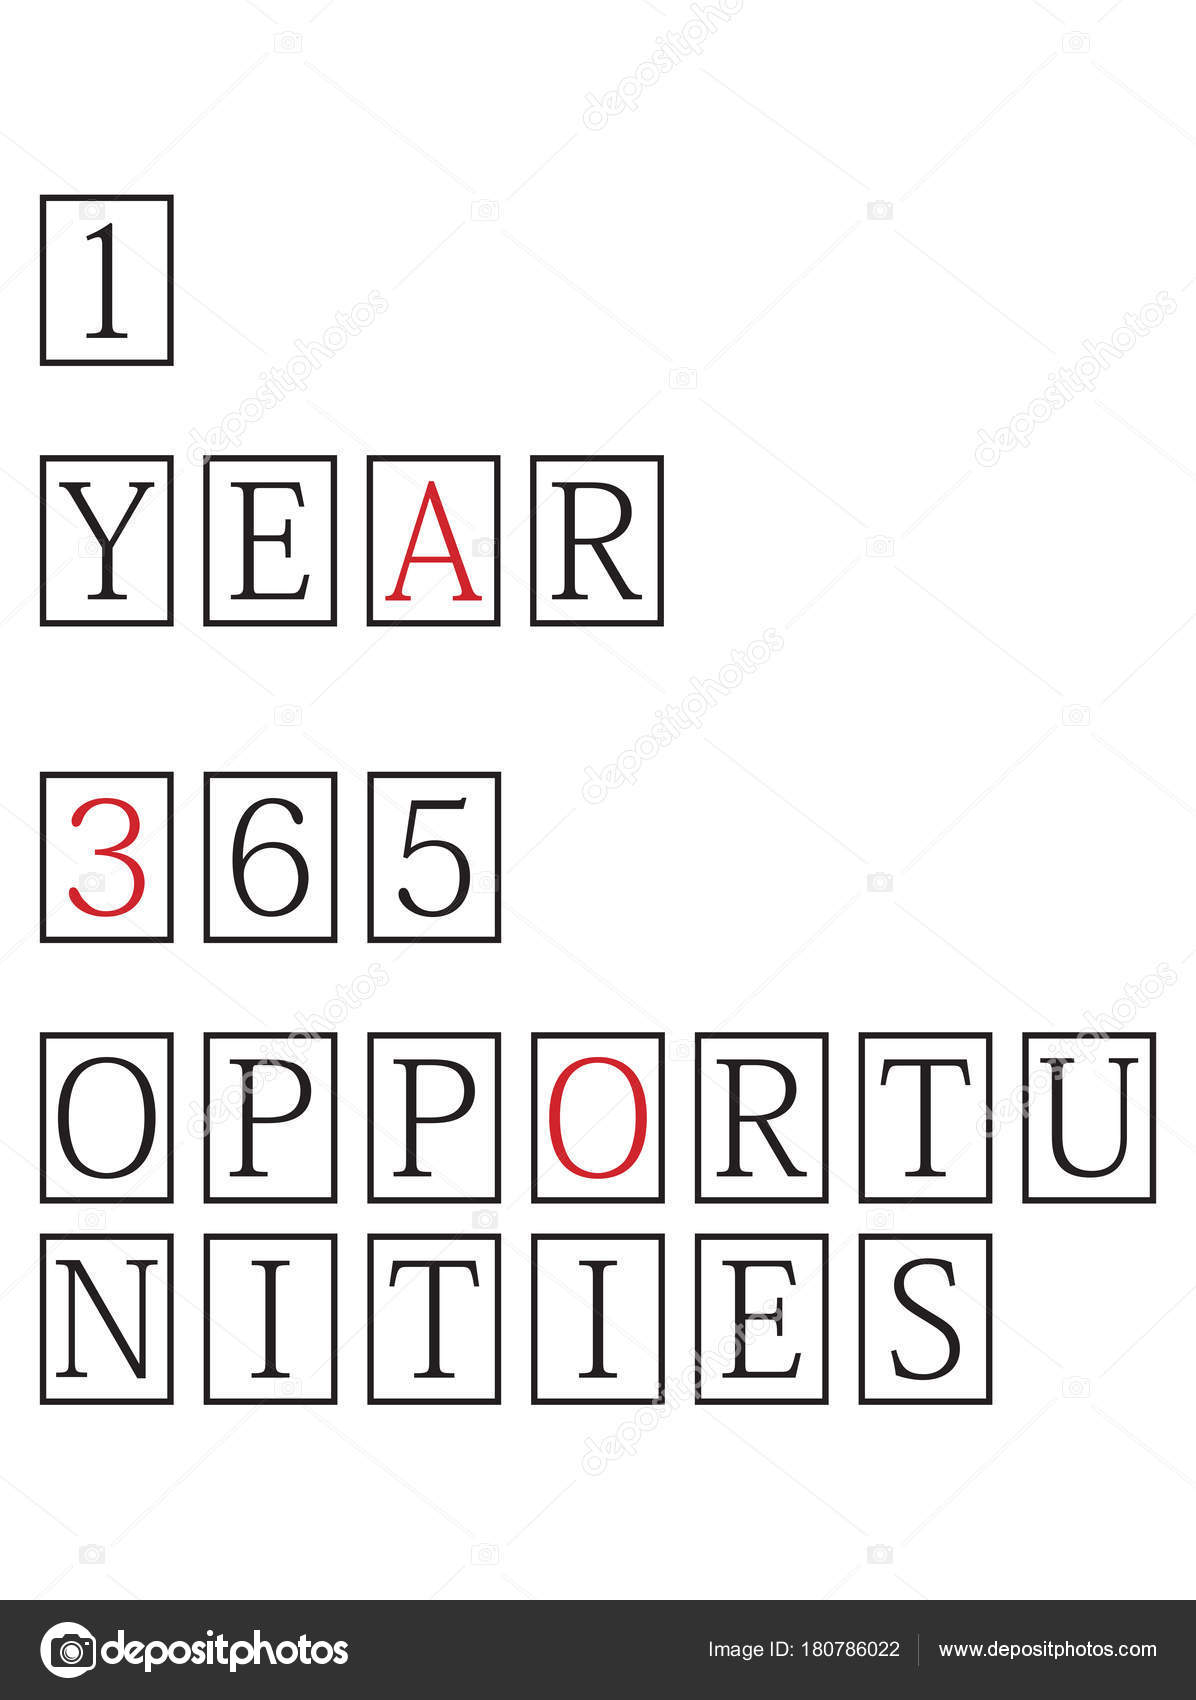 Year 365 Opportunities Motivation Poster Black White Red Retro Cinema Vector Image By C Zozodesign Vector Stock